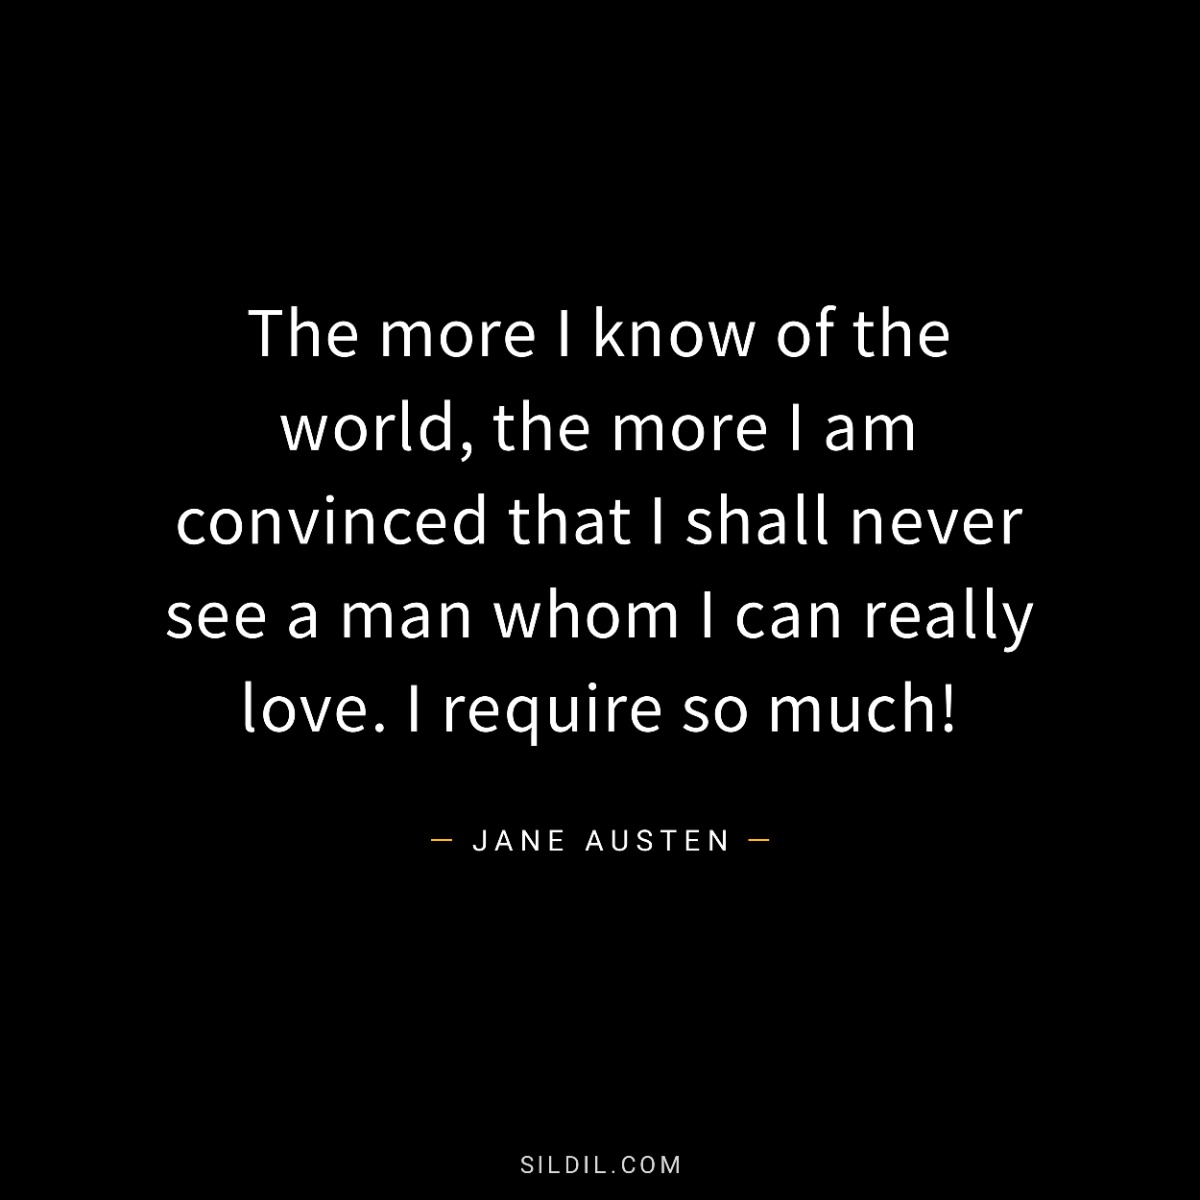 The more I know of the world, the more I am convinced that I shall never see a man whom I can really love. I require so much!